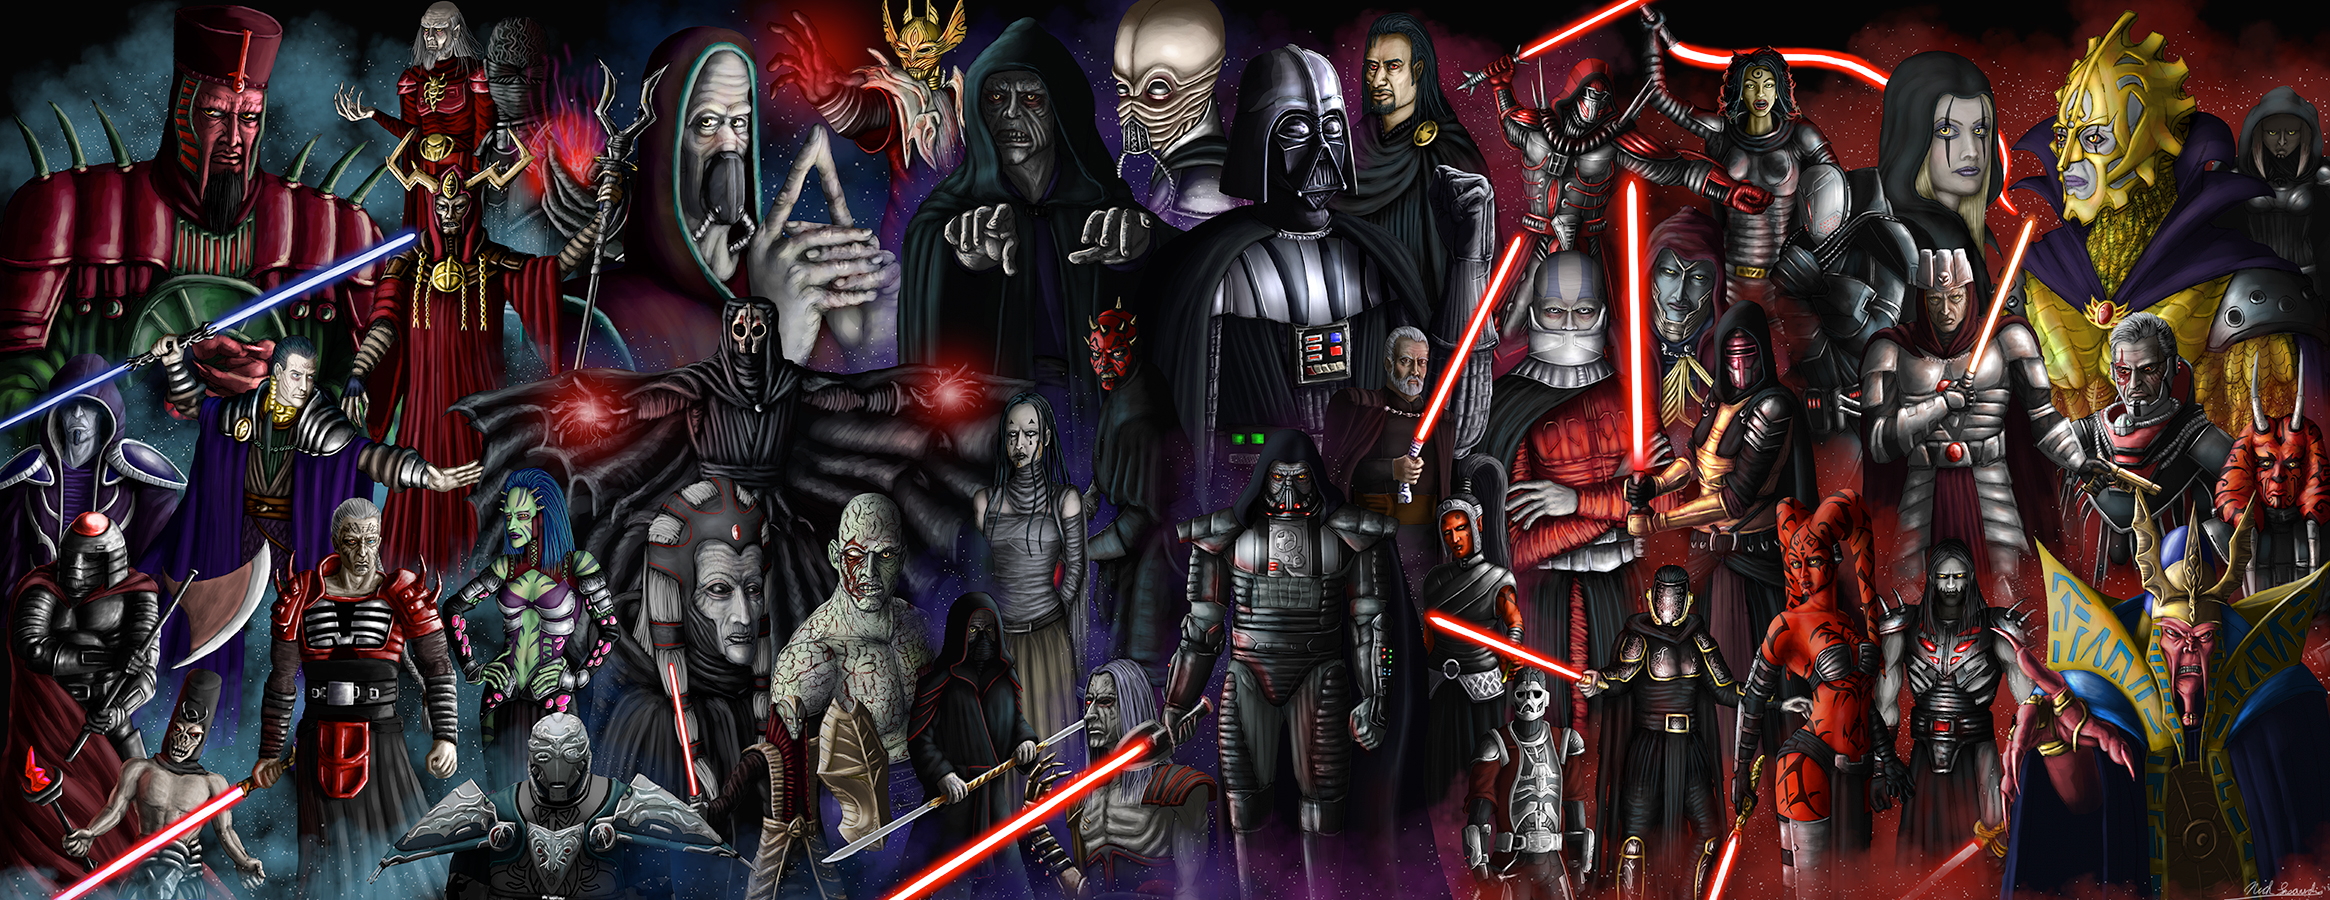 Sith Lord Wallpaper The sith lords by mr